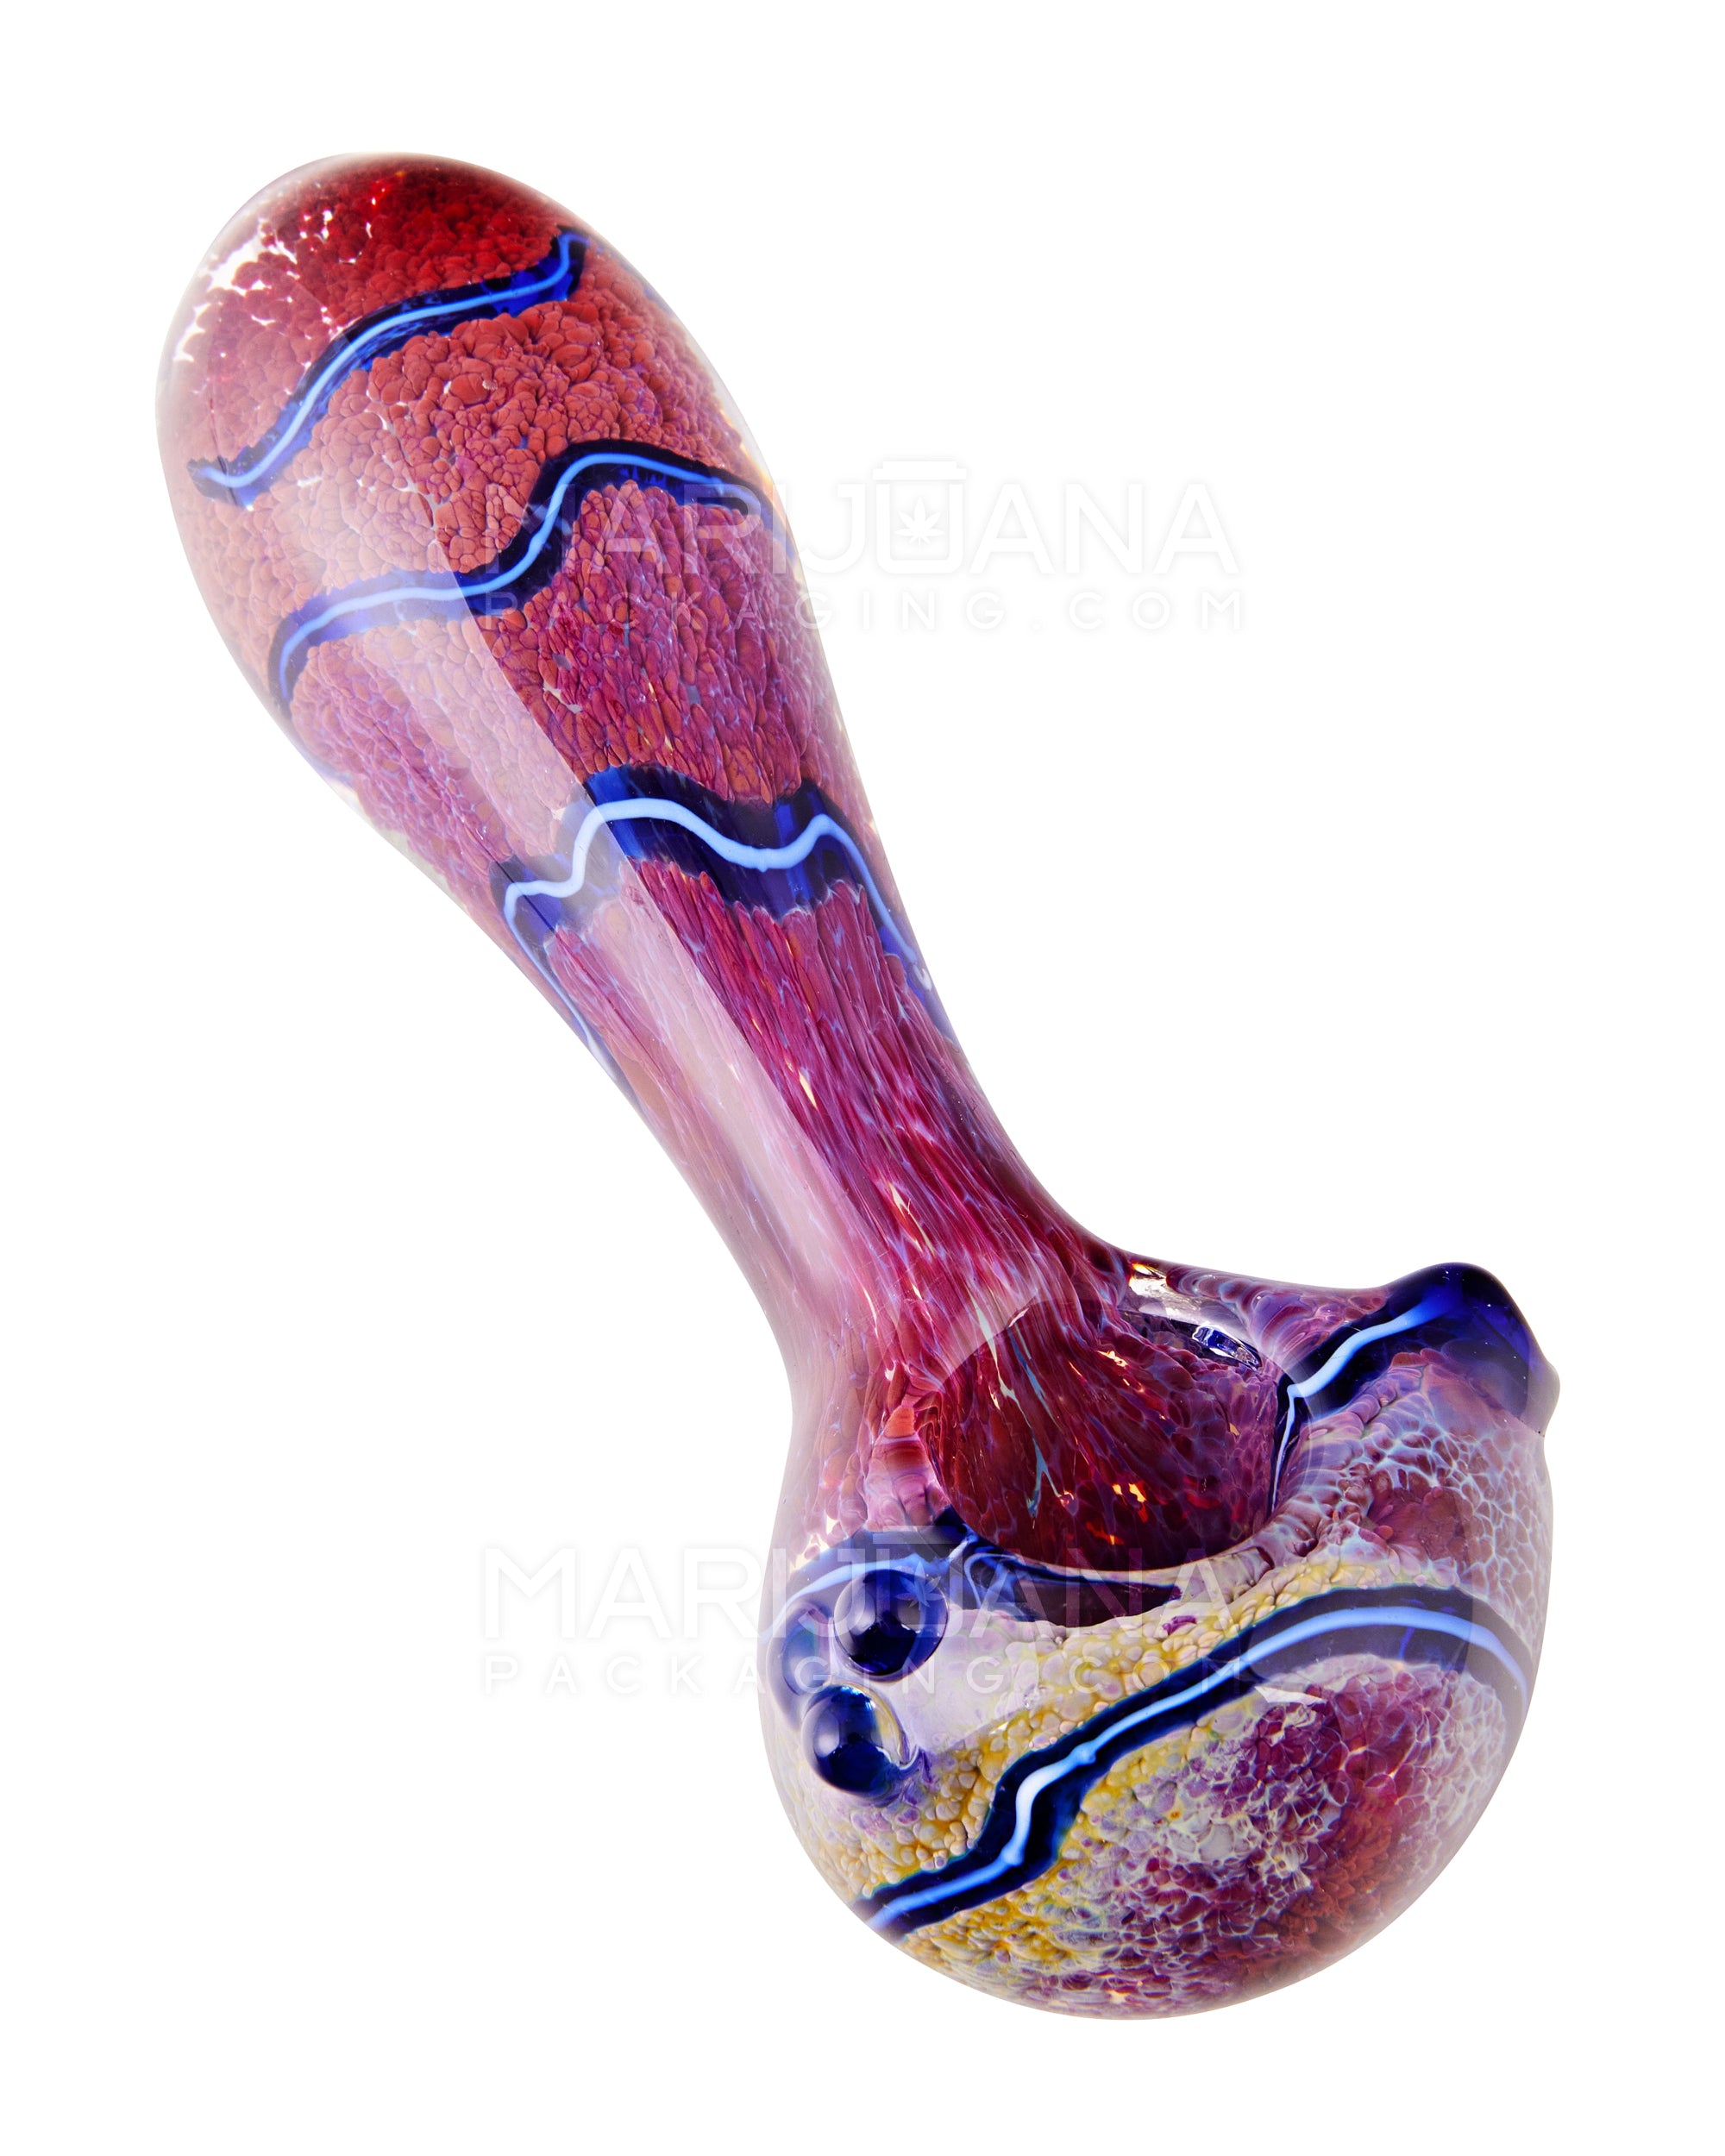 Frit & Fumed Spiral Spoon Hand Pipe w/ Triple Knockers | 4.5in Long - Glass - Assorted - 6